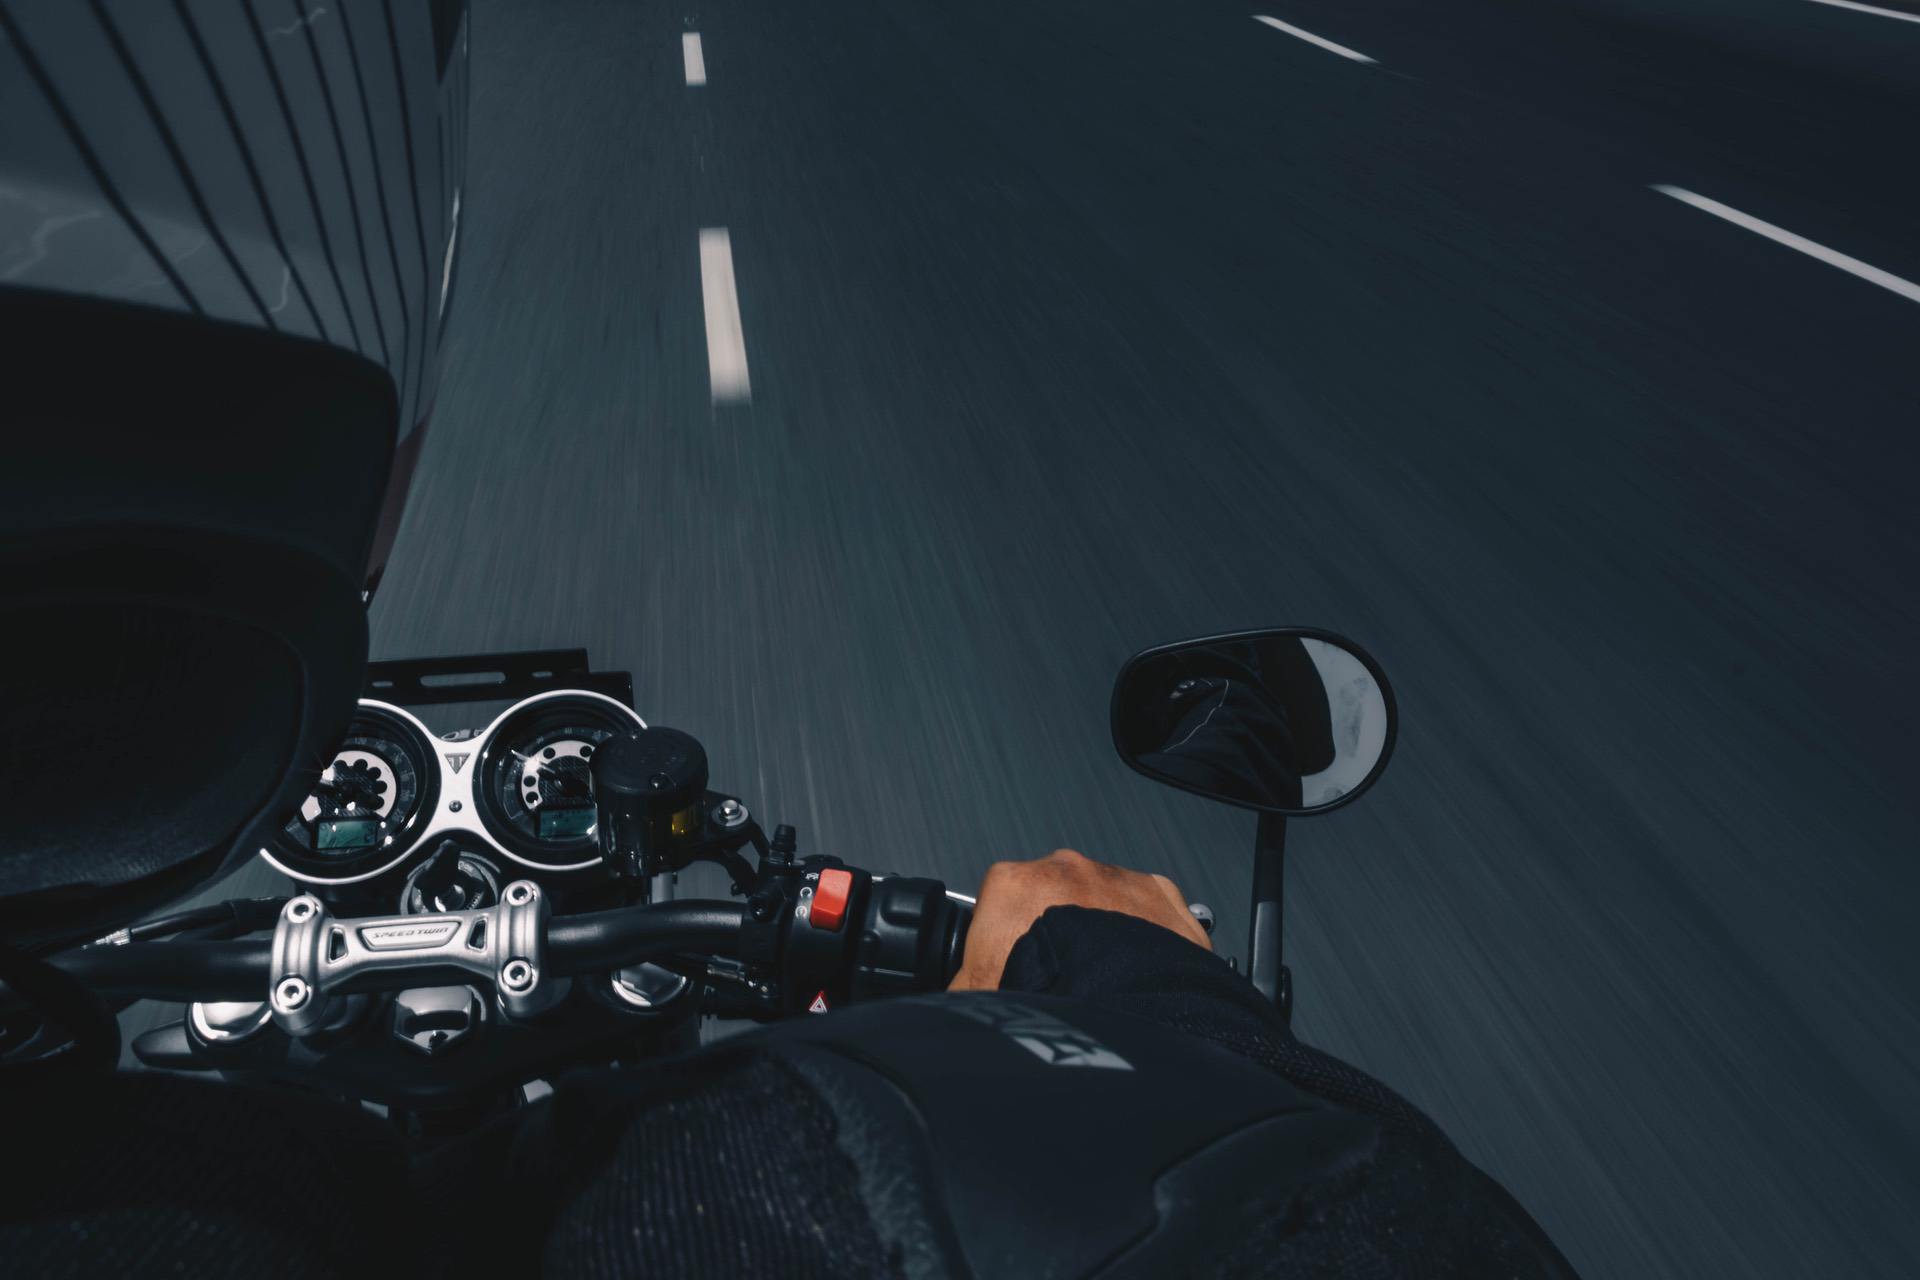 Road blurring while motorcyclist rides down highway at speed